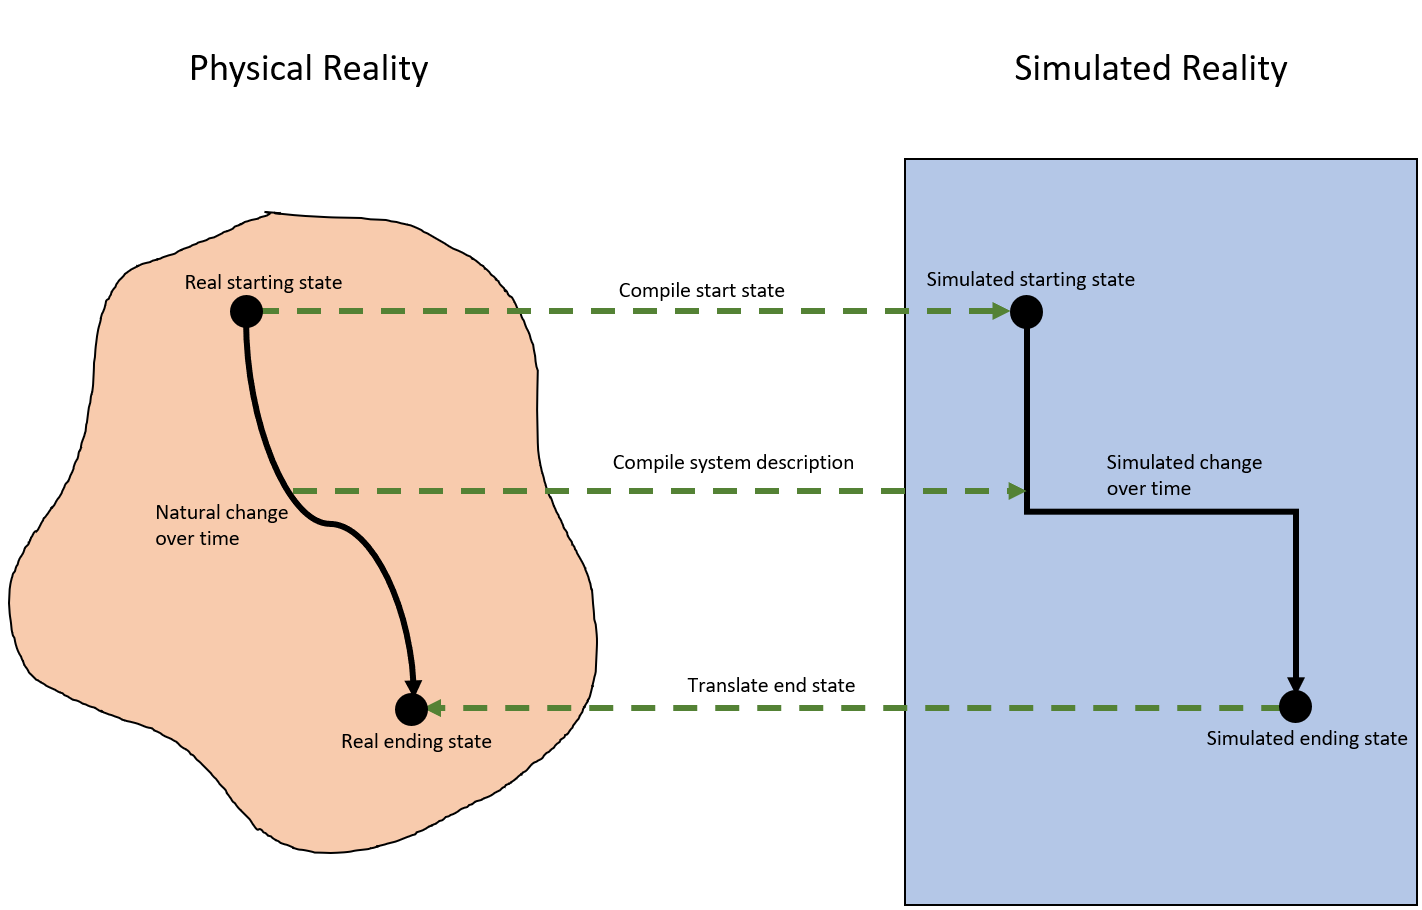 Diagram showing a system in the natural world on the left, which has a smooth & continuous transition between start & end states, and the simulated world on the right, which has discrete discontinuous jumps between the start & end states. Arrows depict association between the start states, transition trajectories, and end states. We compile the real start state to the simulated start state, compile the real system description to simulated form so the transition trajectories correspond, and then translate the simulated end state back to the real ending state.